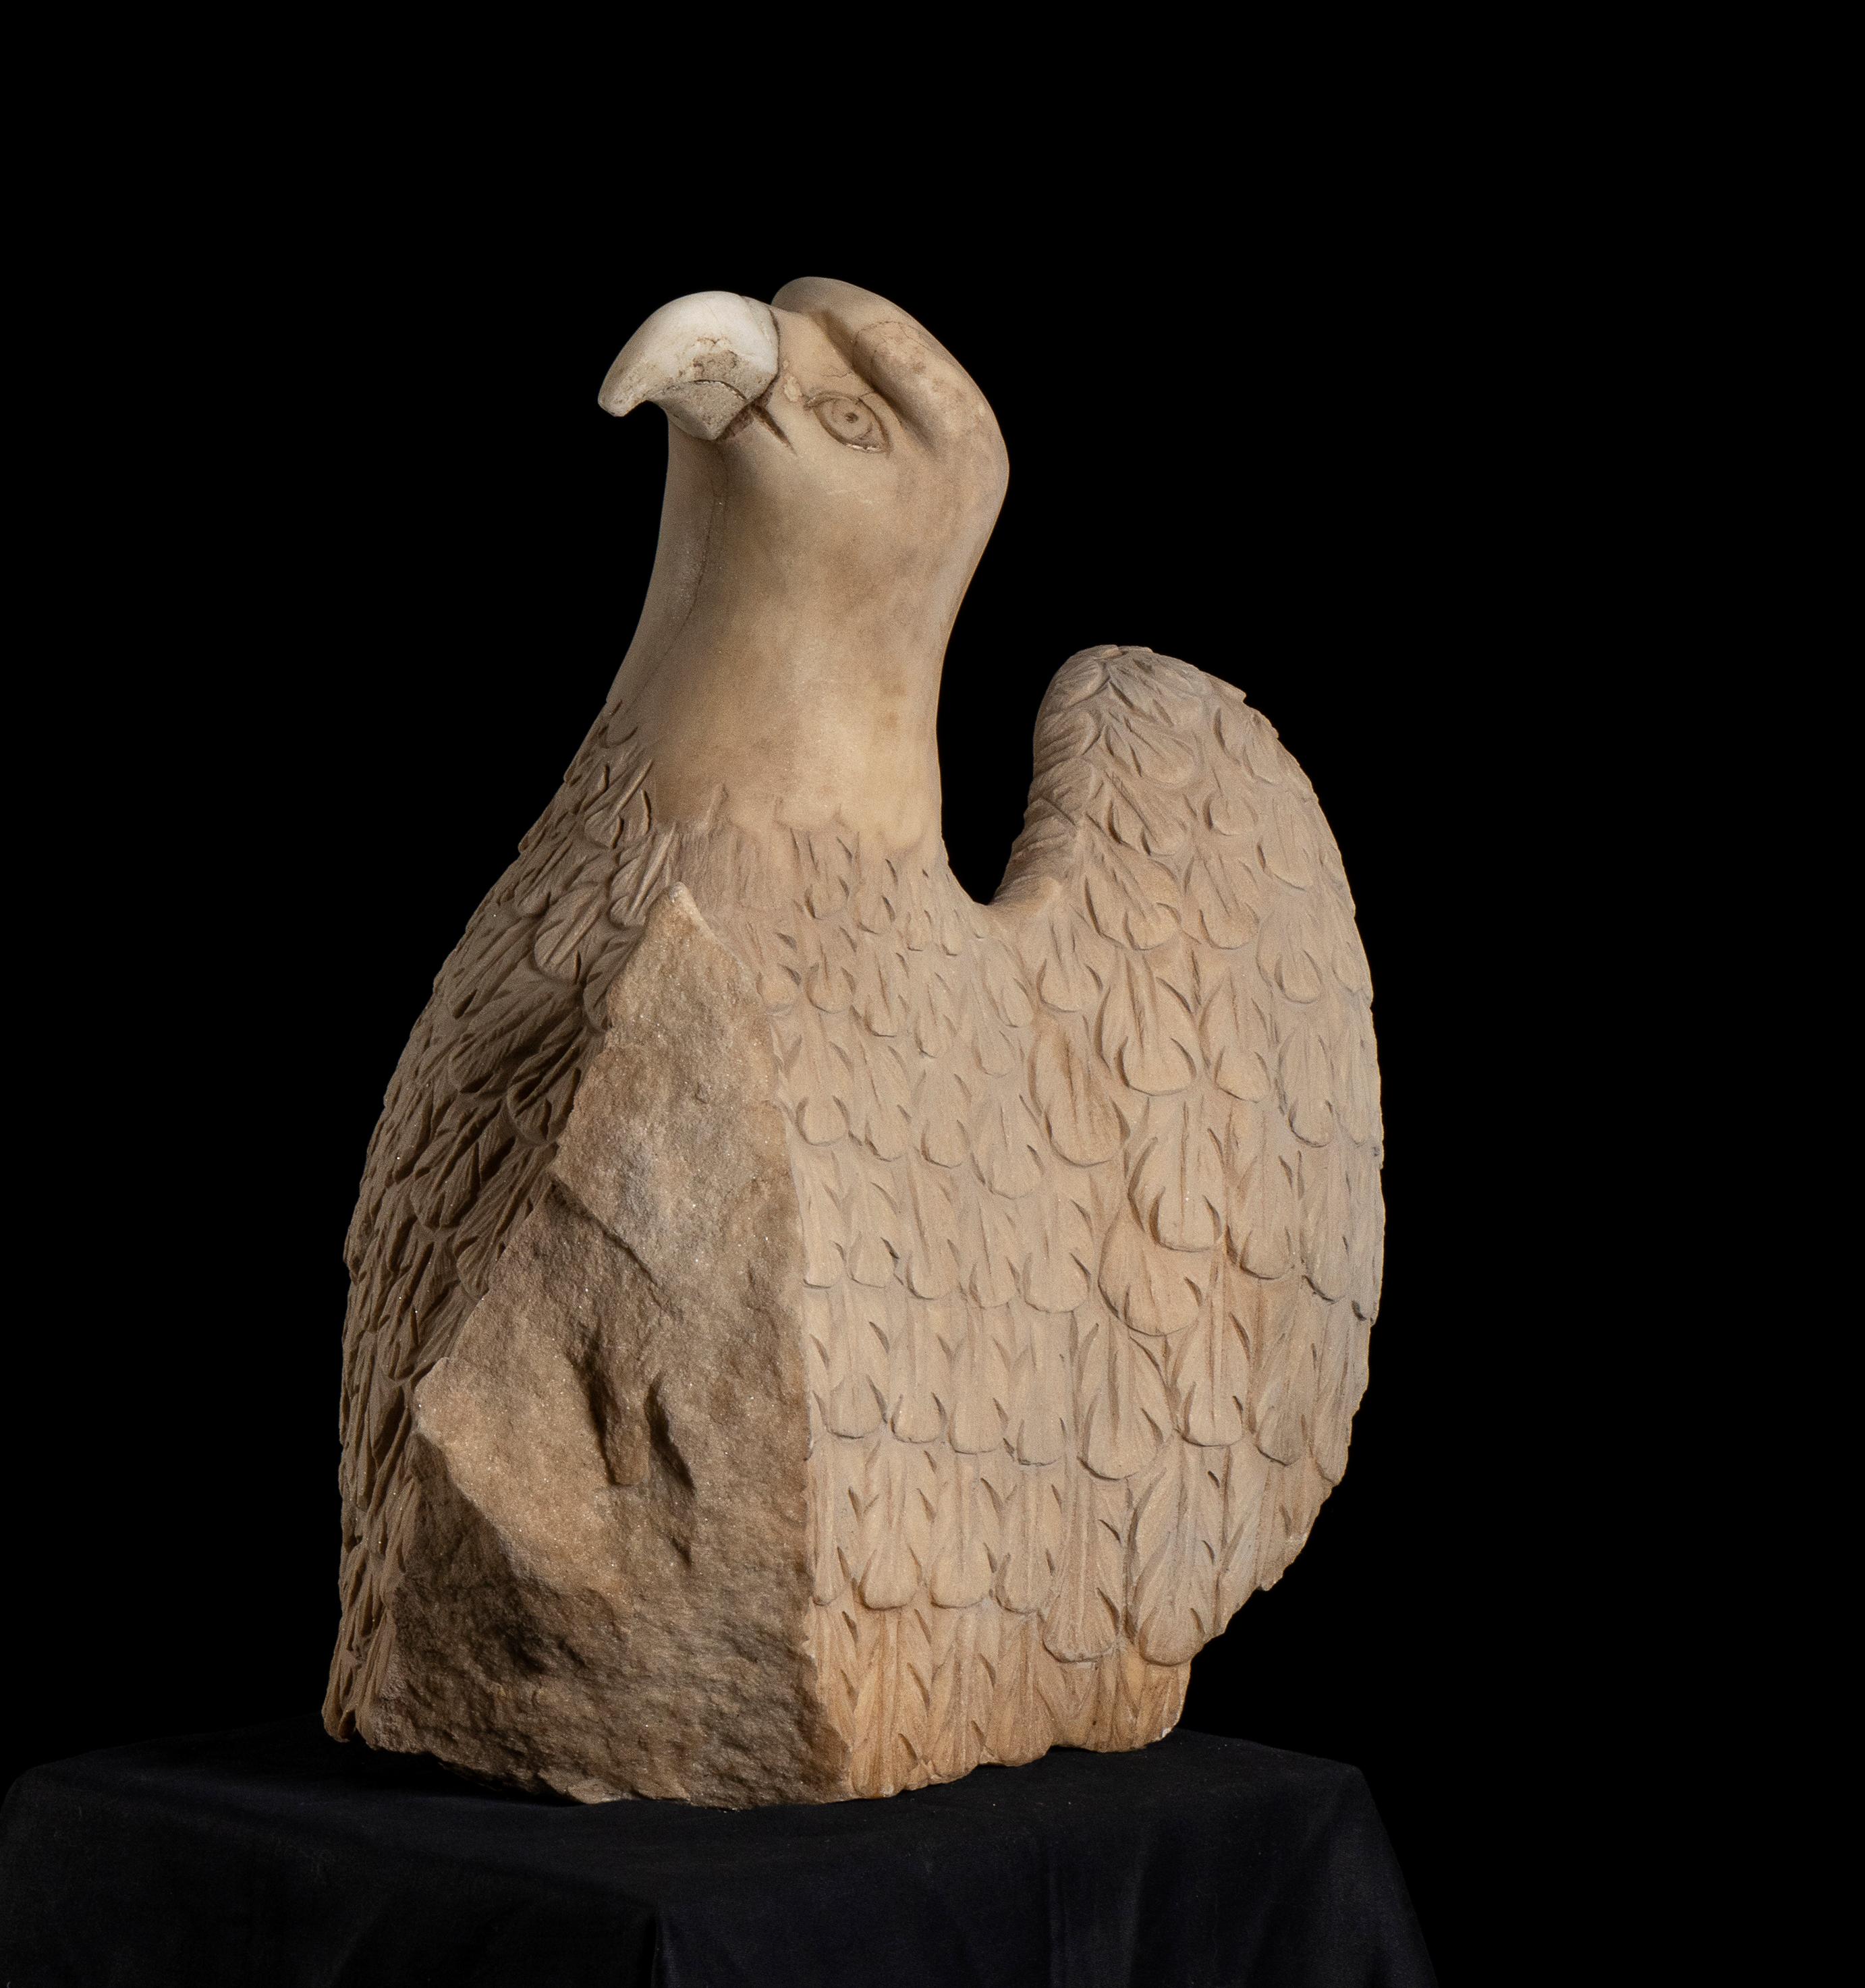 White Marble Sculpture of The Imperial Eagle, Symbol of the Roman Empire  6